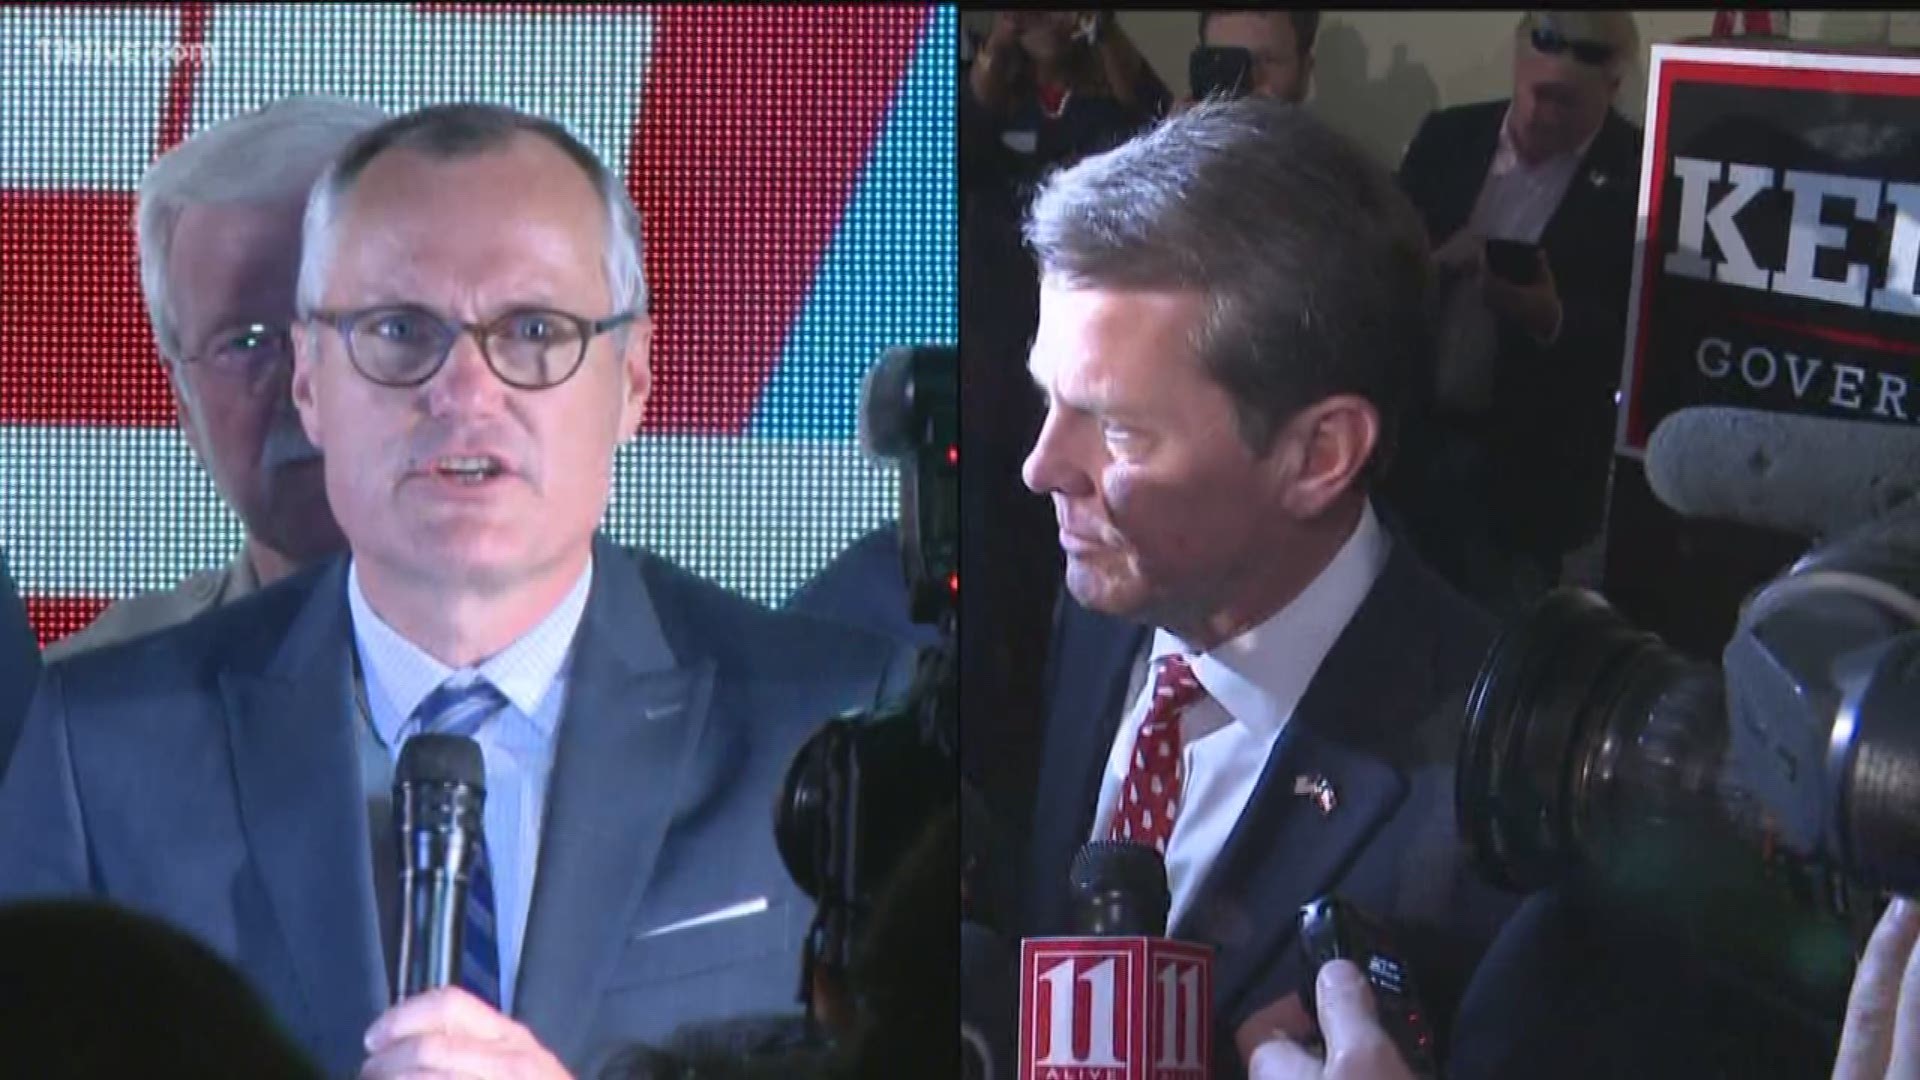 Lt. Governor Casey Cagle coasted to the top spot in the primary but since he stayed below 50 percent, he will have a runoff with the Secretary of State Brian Kemp. 